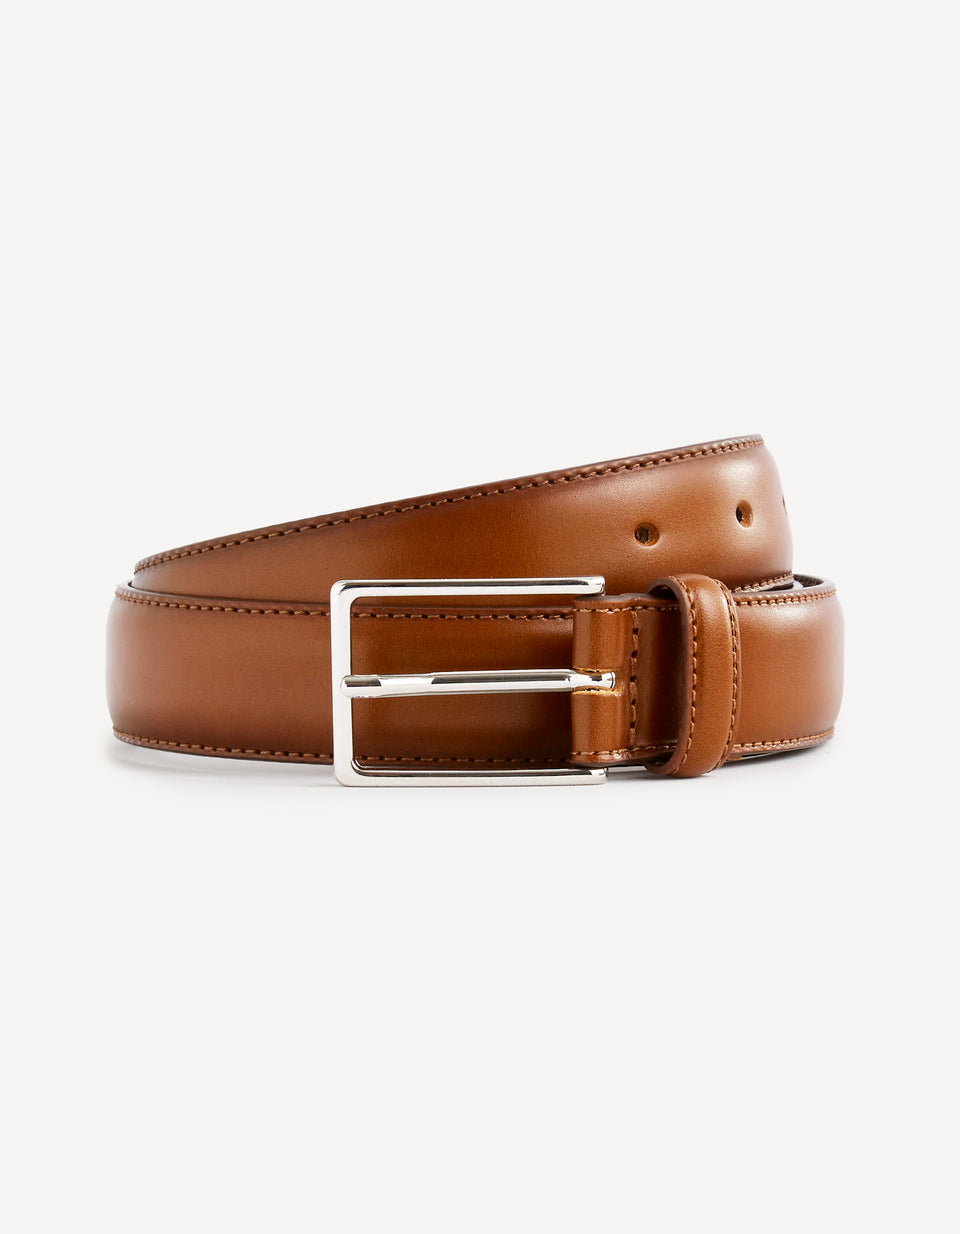 Brown Leather Belt With Metallic Buckle